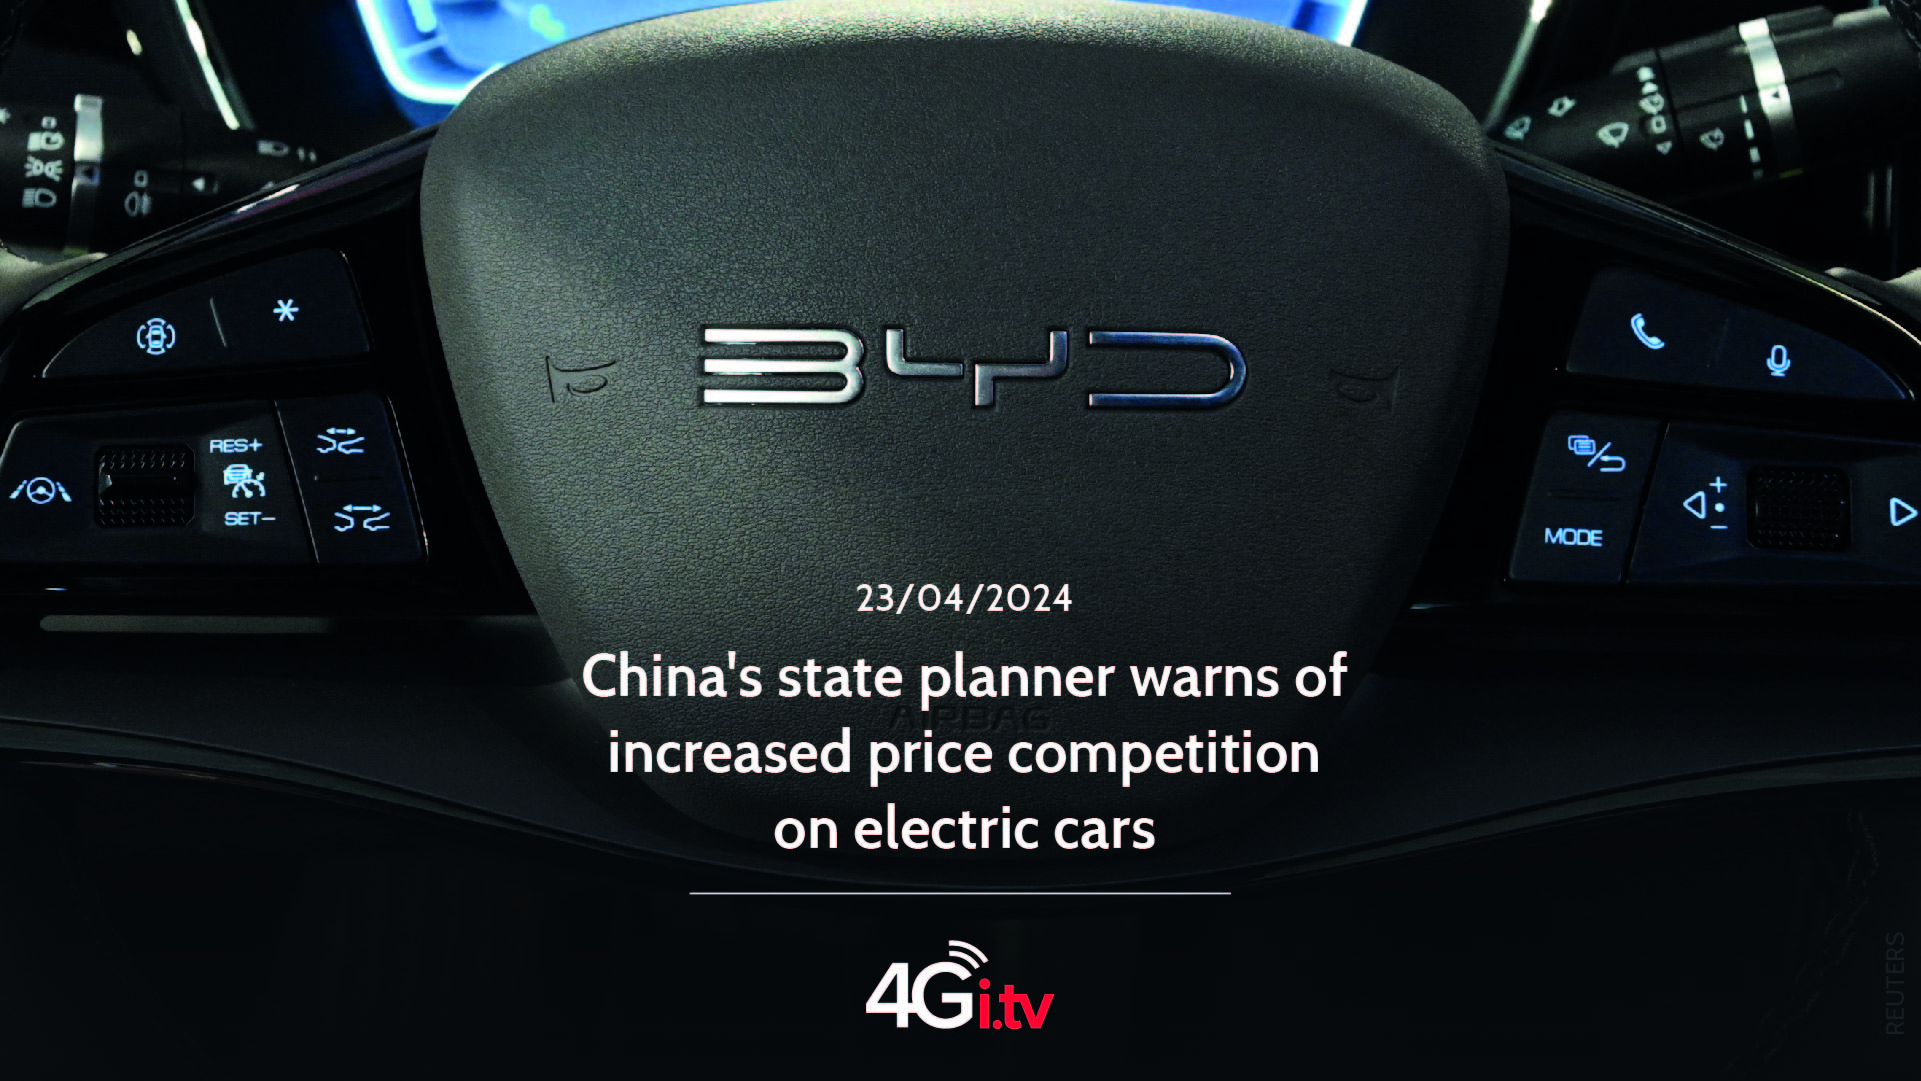 Lesen Sie mehr über den Artikel China’s state planner warns of increased price competition on electric cars